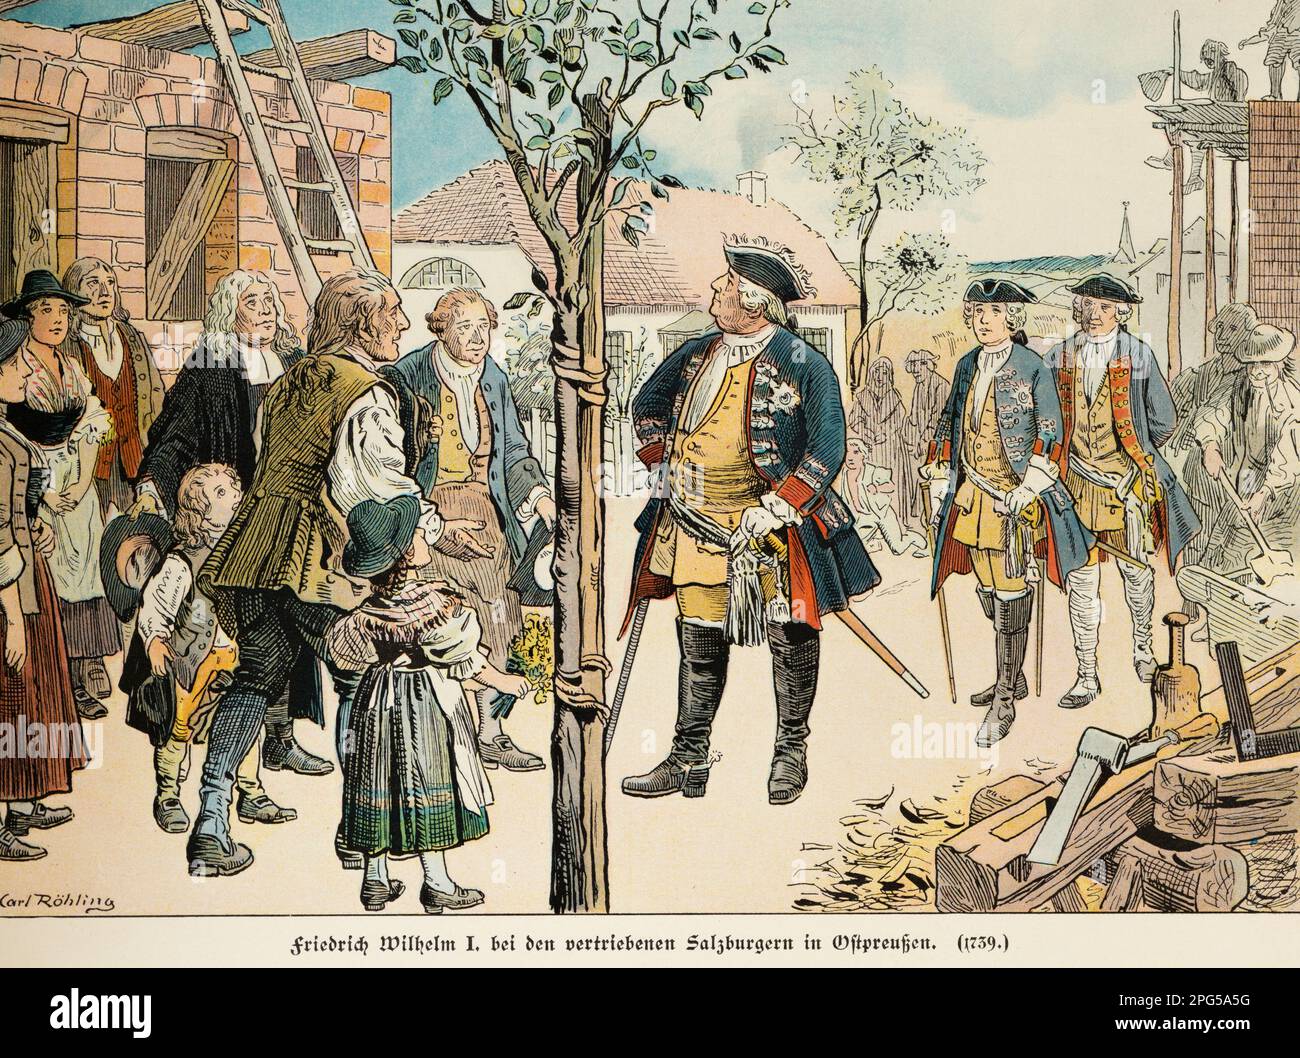 Friedrich Wilhelm a Esat Prussia nel 1739, visiting Citizens expelled from Salzburg, hstory of the Hohenzollern, Prussia, Illustration 1899 Foto Stock